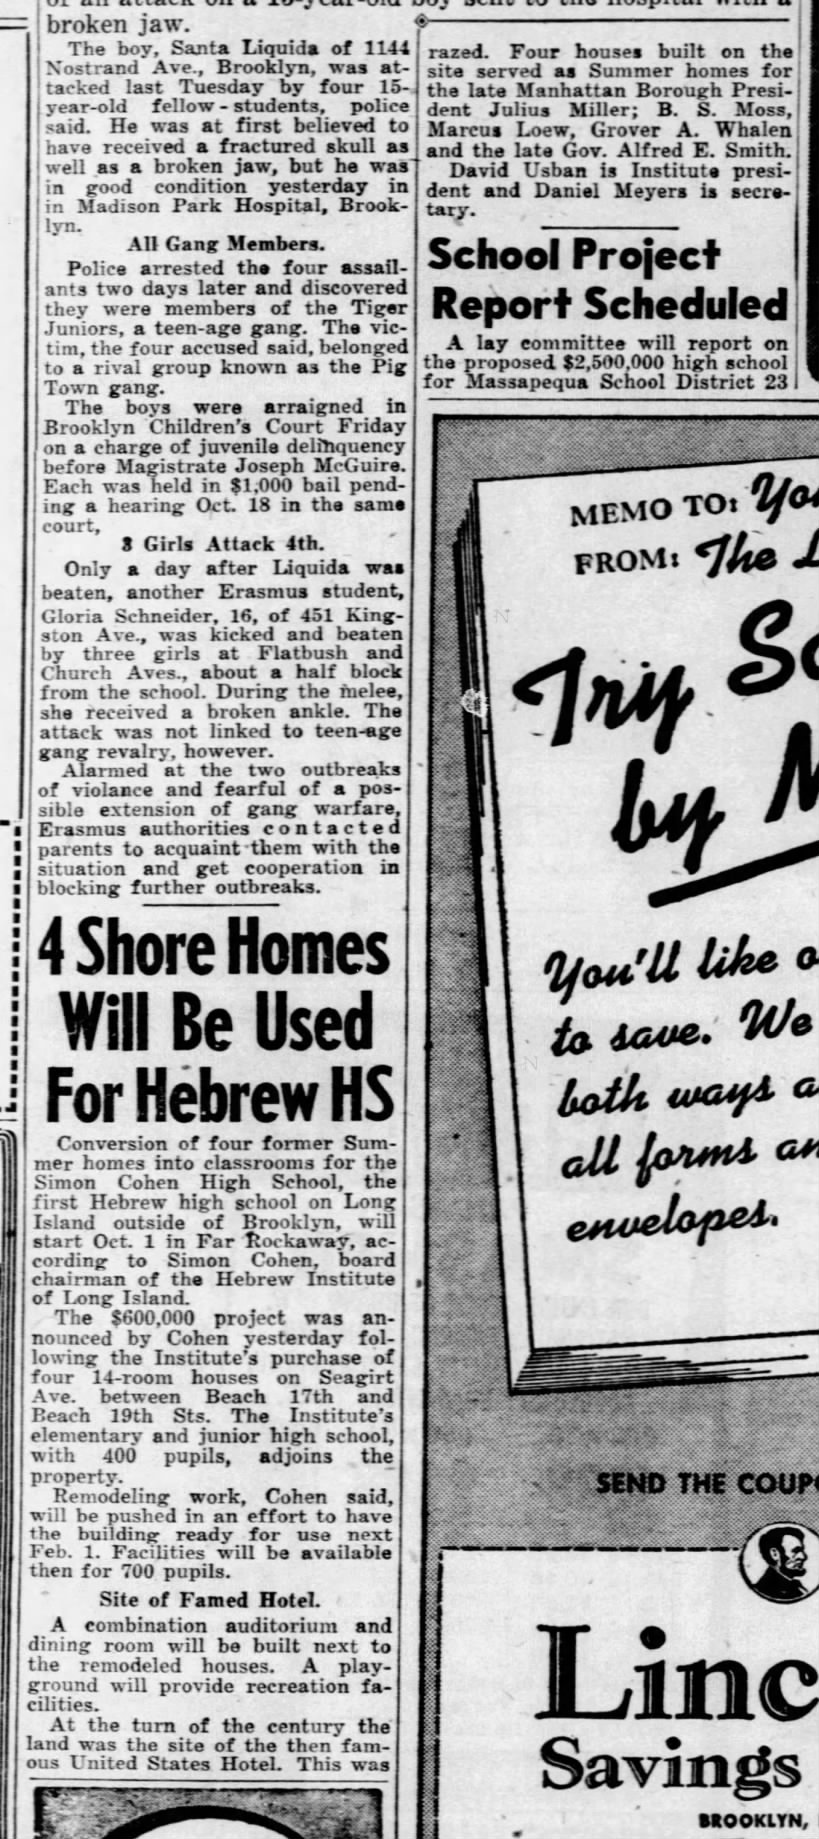 4 Shore Homes Will Be Used fot Hebrew HS